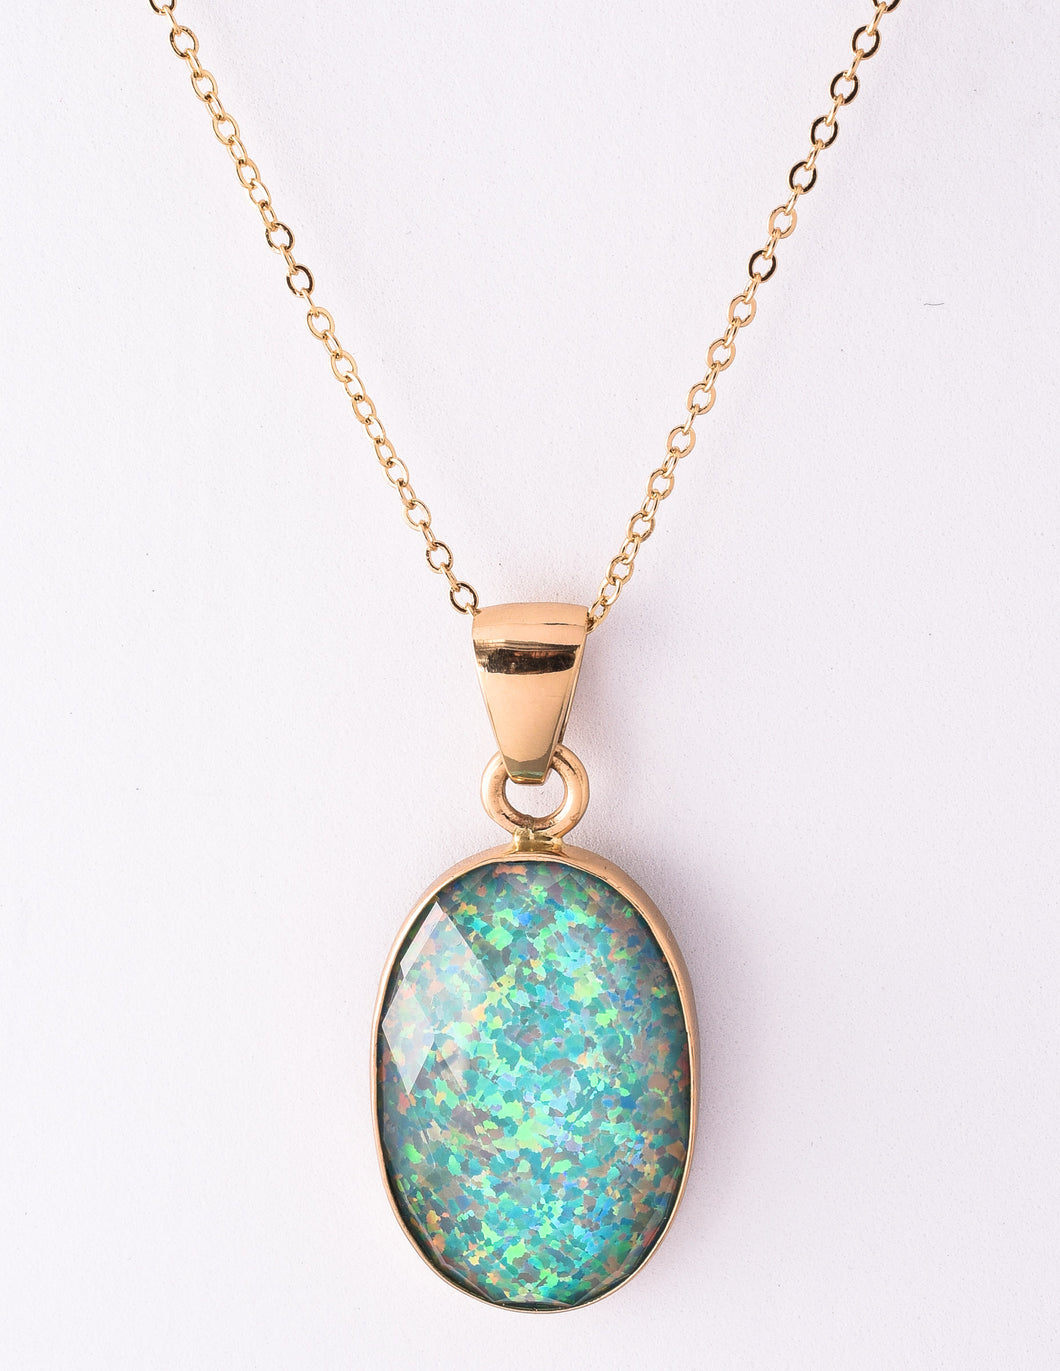 Alchemia Synthetic Opal Pendant Necklace - Green